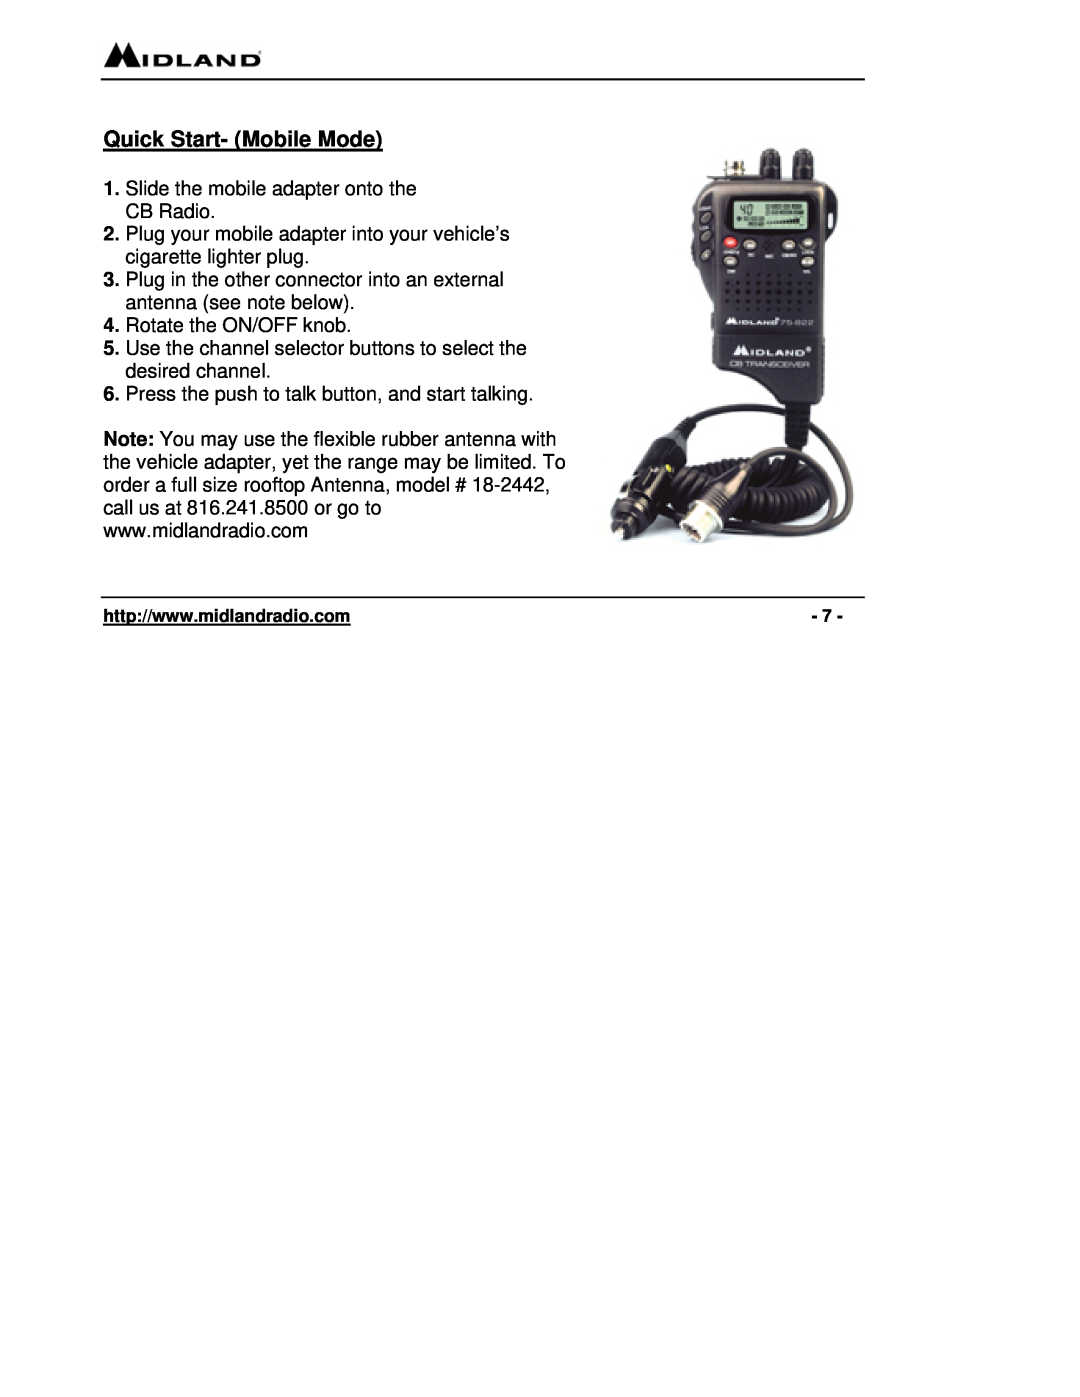 Midland Radio 75-822 Quick Start- Mobile Mode, Slide the mobile adapter onto the CB Radio, Rotate the ON/OFF knob 